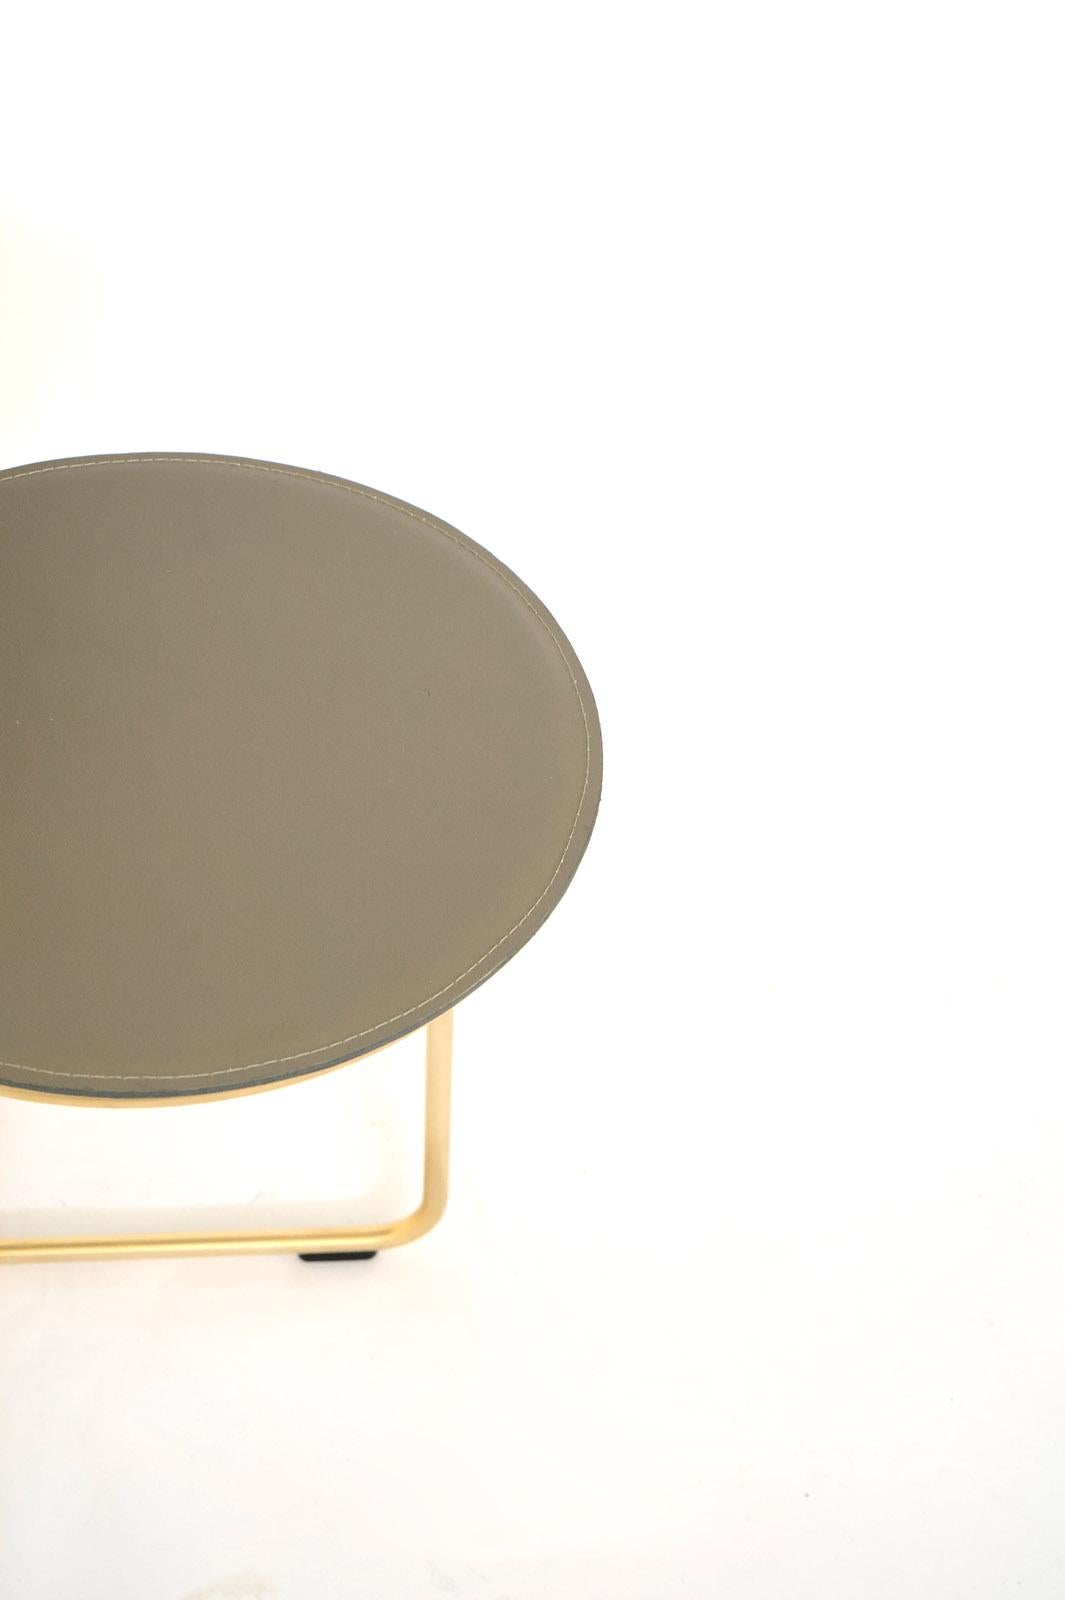 Galvanized Bistable Leather Gold Contemporary Side Table Made in Italy by Enrico Girotti